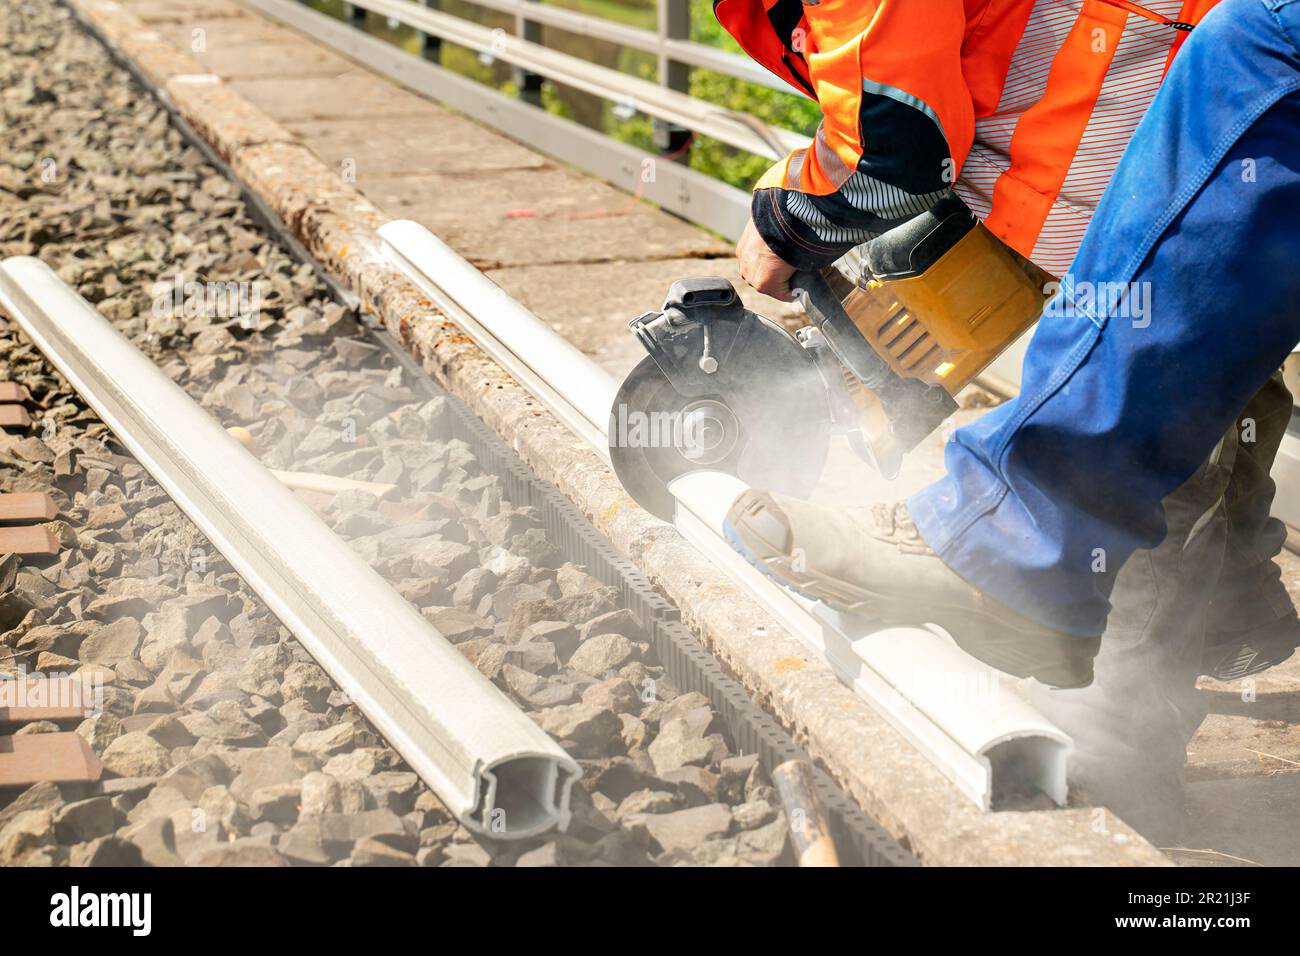 A worker in work clothes and high visibility vest is cutting off a piece of plastic cable duct with a hand held circular saw. A colleague in work clot Stock Photo